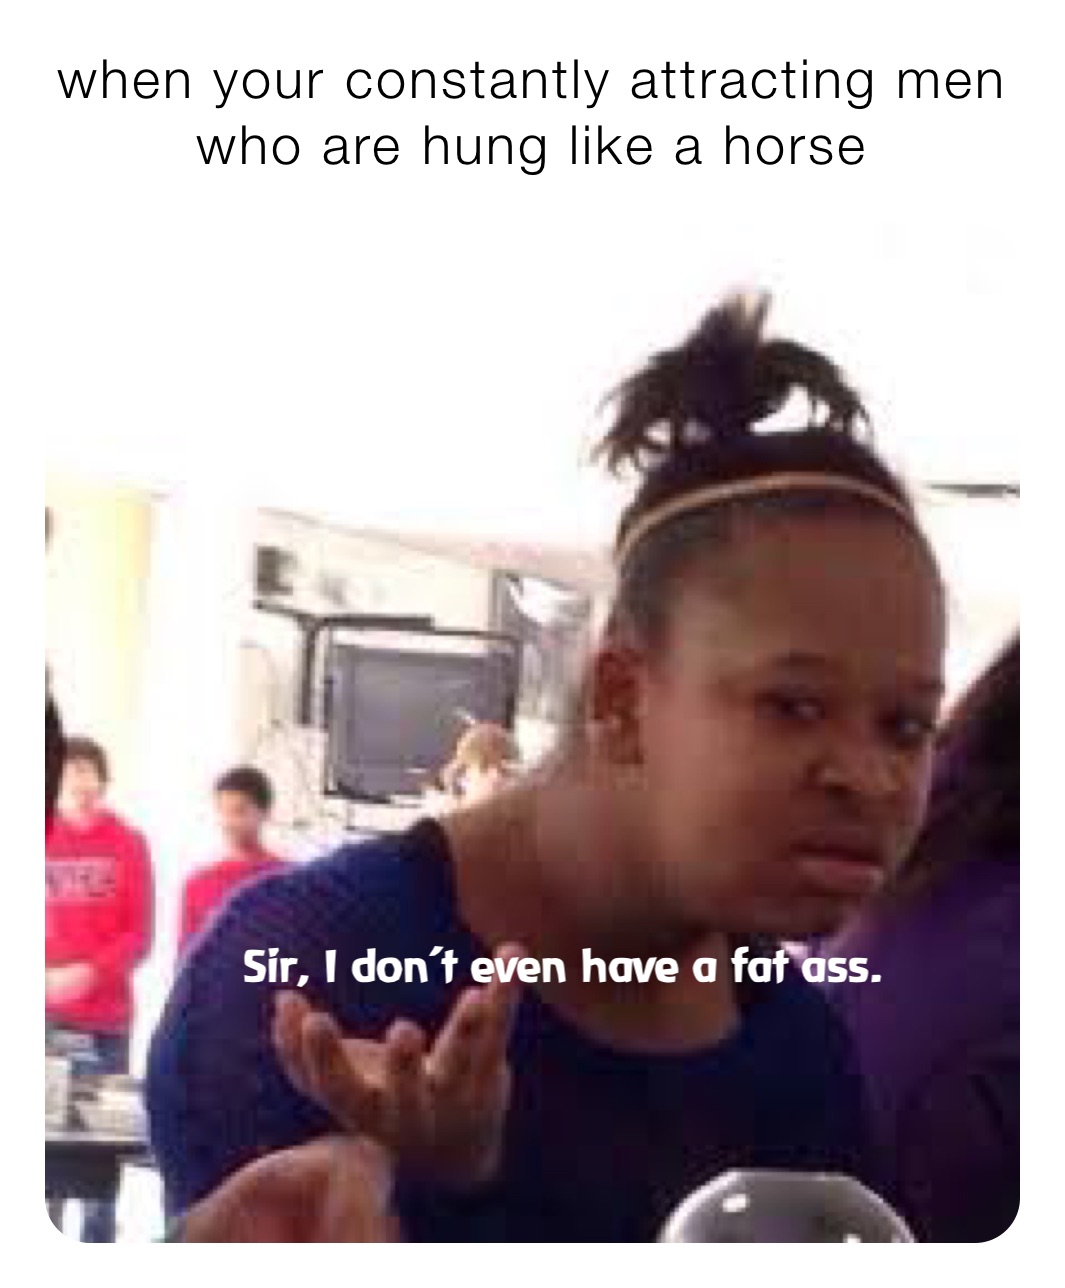 when your constantly attracting men who are hung like a horse